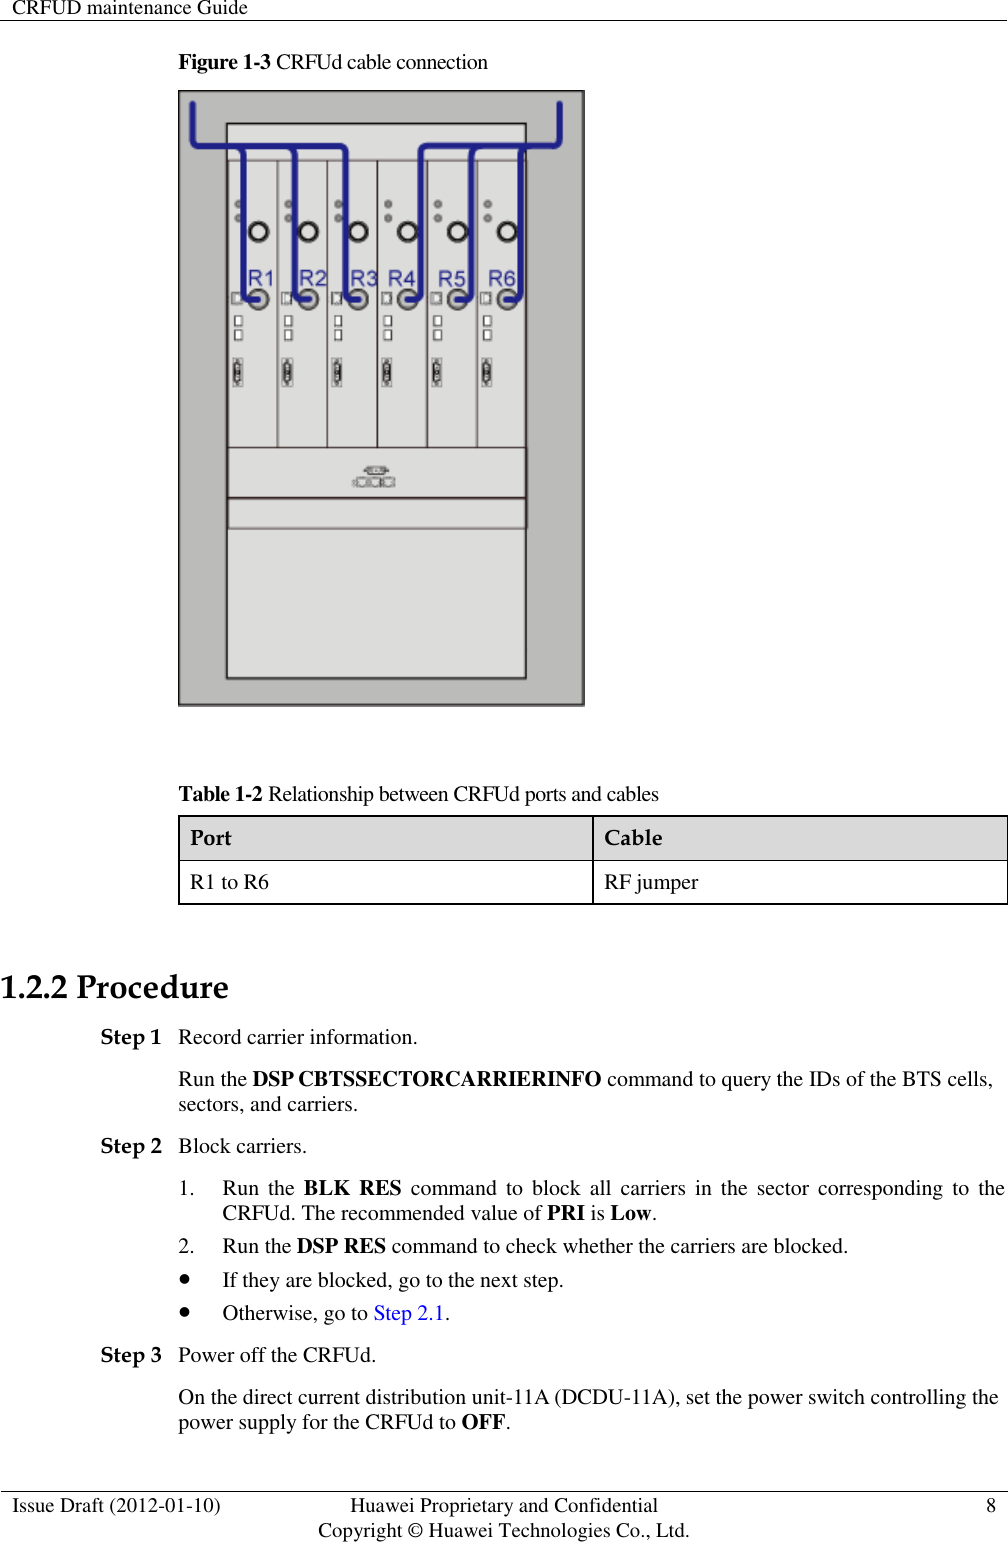 CRFUD maintenance Guide   Issue Draft (2012-01-10) Huawei Proprietary and Confidential                                     Copyright © Huawei Technologies Co., Ltd. 8  Figure 1-3 CRFUd cable connection   Table 1-2 Relationship between CRFUd ports and cables Port Cable R1 to R6 RF jumper  1.2.2 Procedure Step 1 Record carrier information. Run the DSP CBTSSECTORCARRIERINFO command to query the IDs of the BTS cells, sectors, and carriers. Step 2 Block carriers. 1. Run  the  BLK RES  command to  block  all carriers in  the  sector corresponding  to  the CRFUd. The recommended value of PRI is Low.   2. Run the DSP RES command to check whether the carriers are blocked.  If they are blocked, go to the next step.  Otherwise, go to Step 2.1.   Step 3 Power off the CRFUd. On the direct current distribution unit-11A (DCDU-11A), set the power switch controlling the power supply for the CRFUd to OFF. 